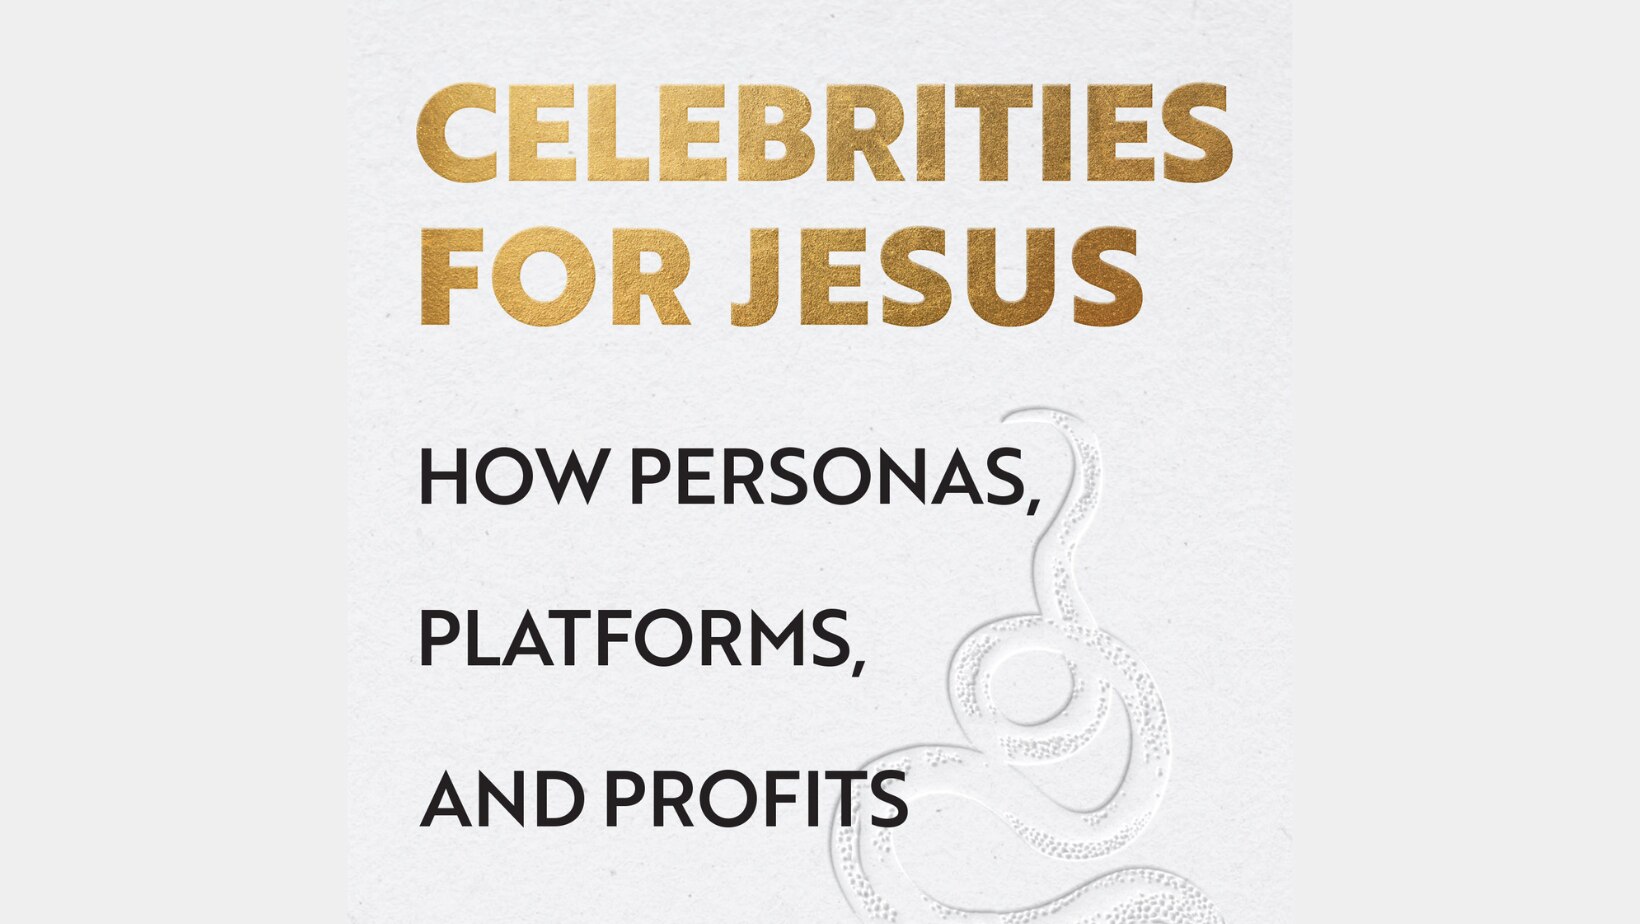 How celebrity influenced Christianity and church leaders